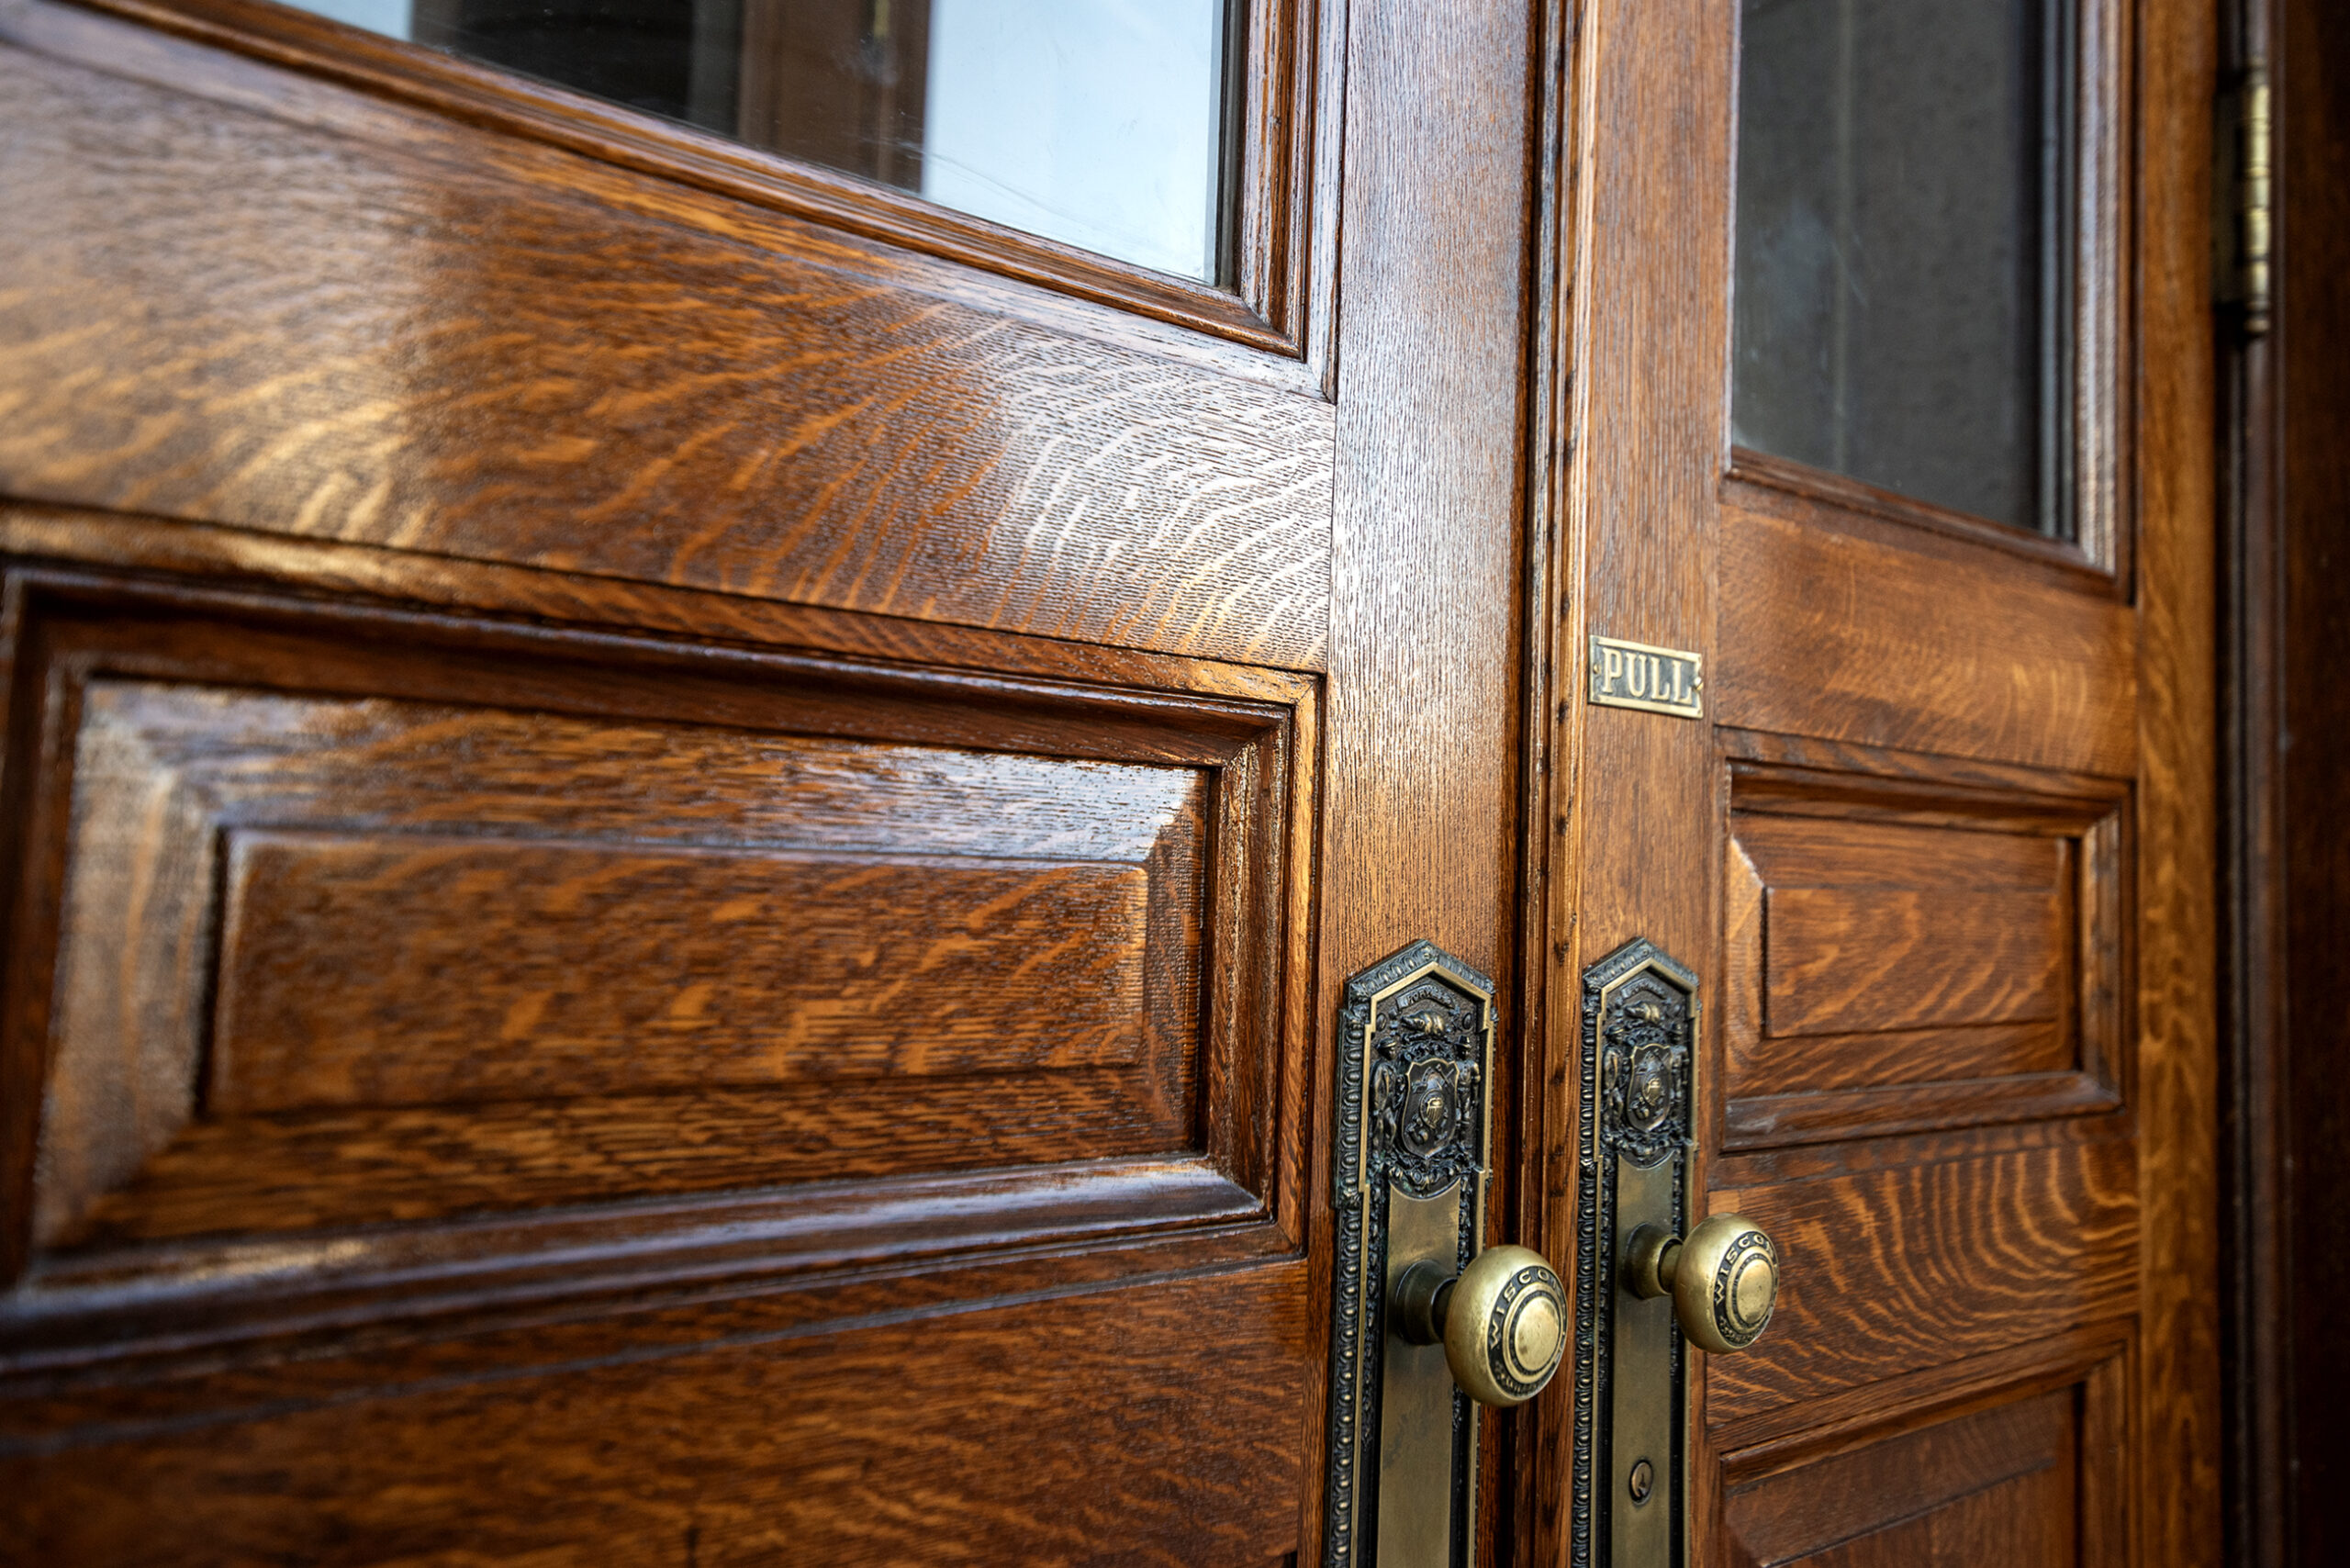 Wooden doors with a shiny finish and old door handle.